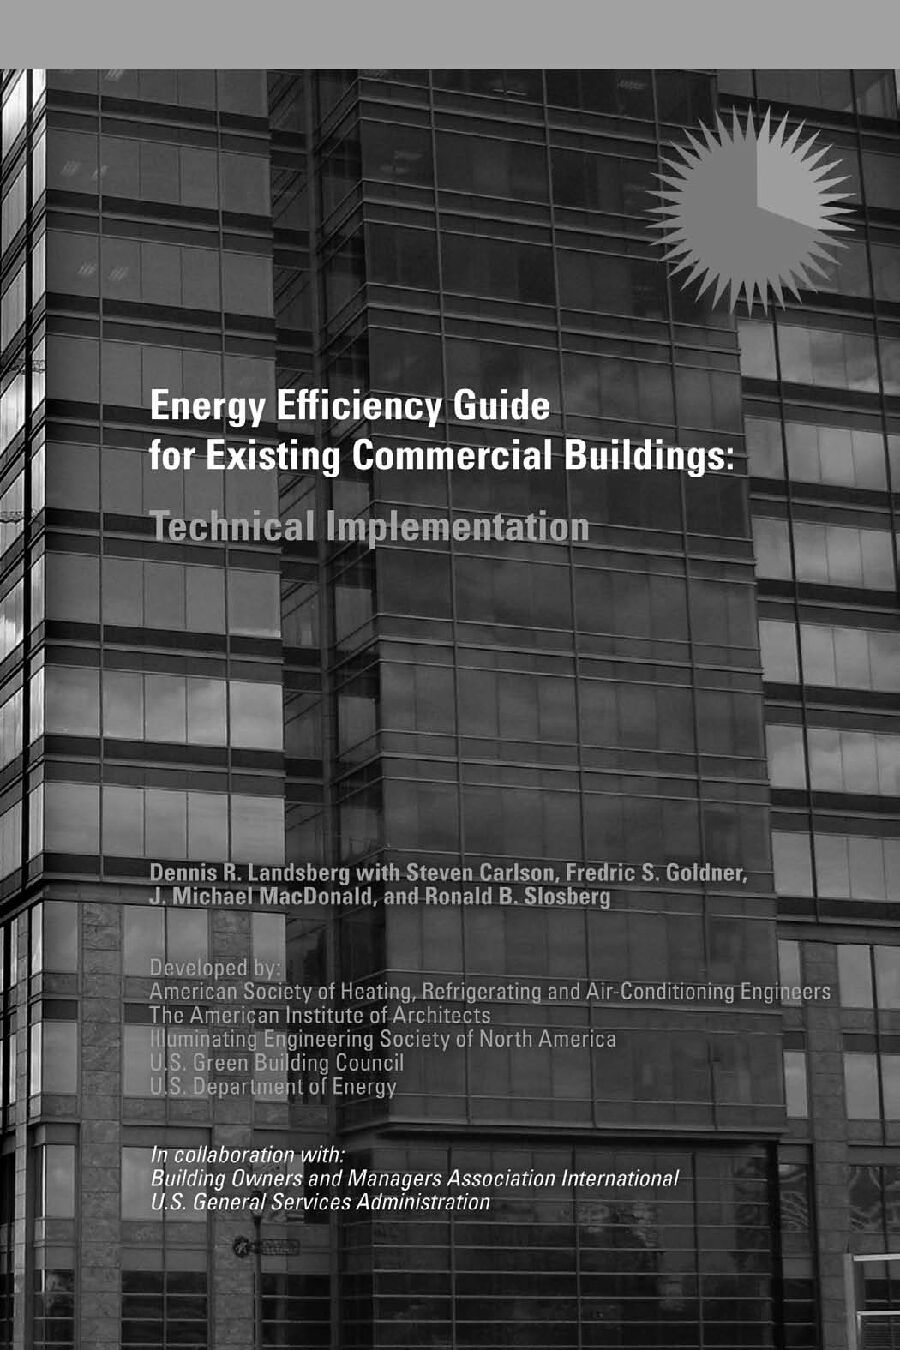 Energy Efficiency Guide for Existing Commercial Buildings - Technical Implementation 2011